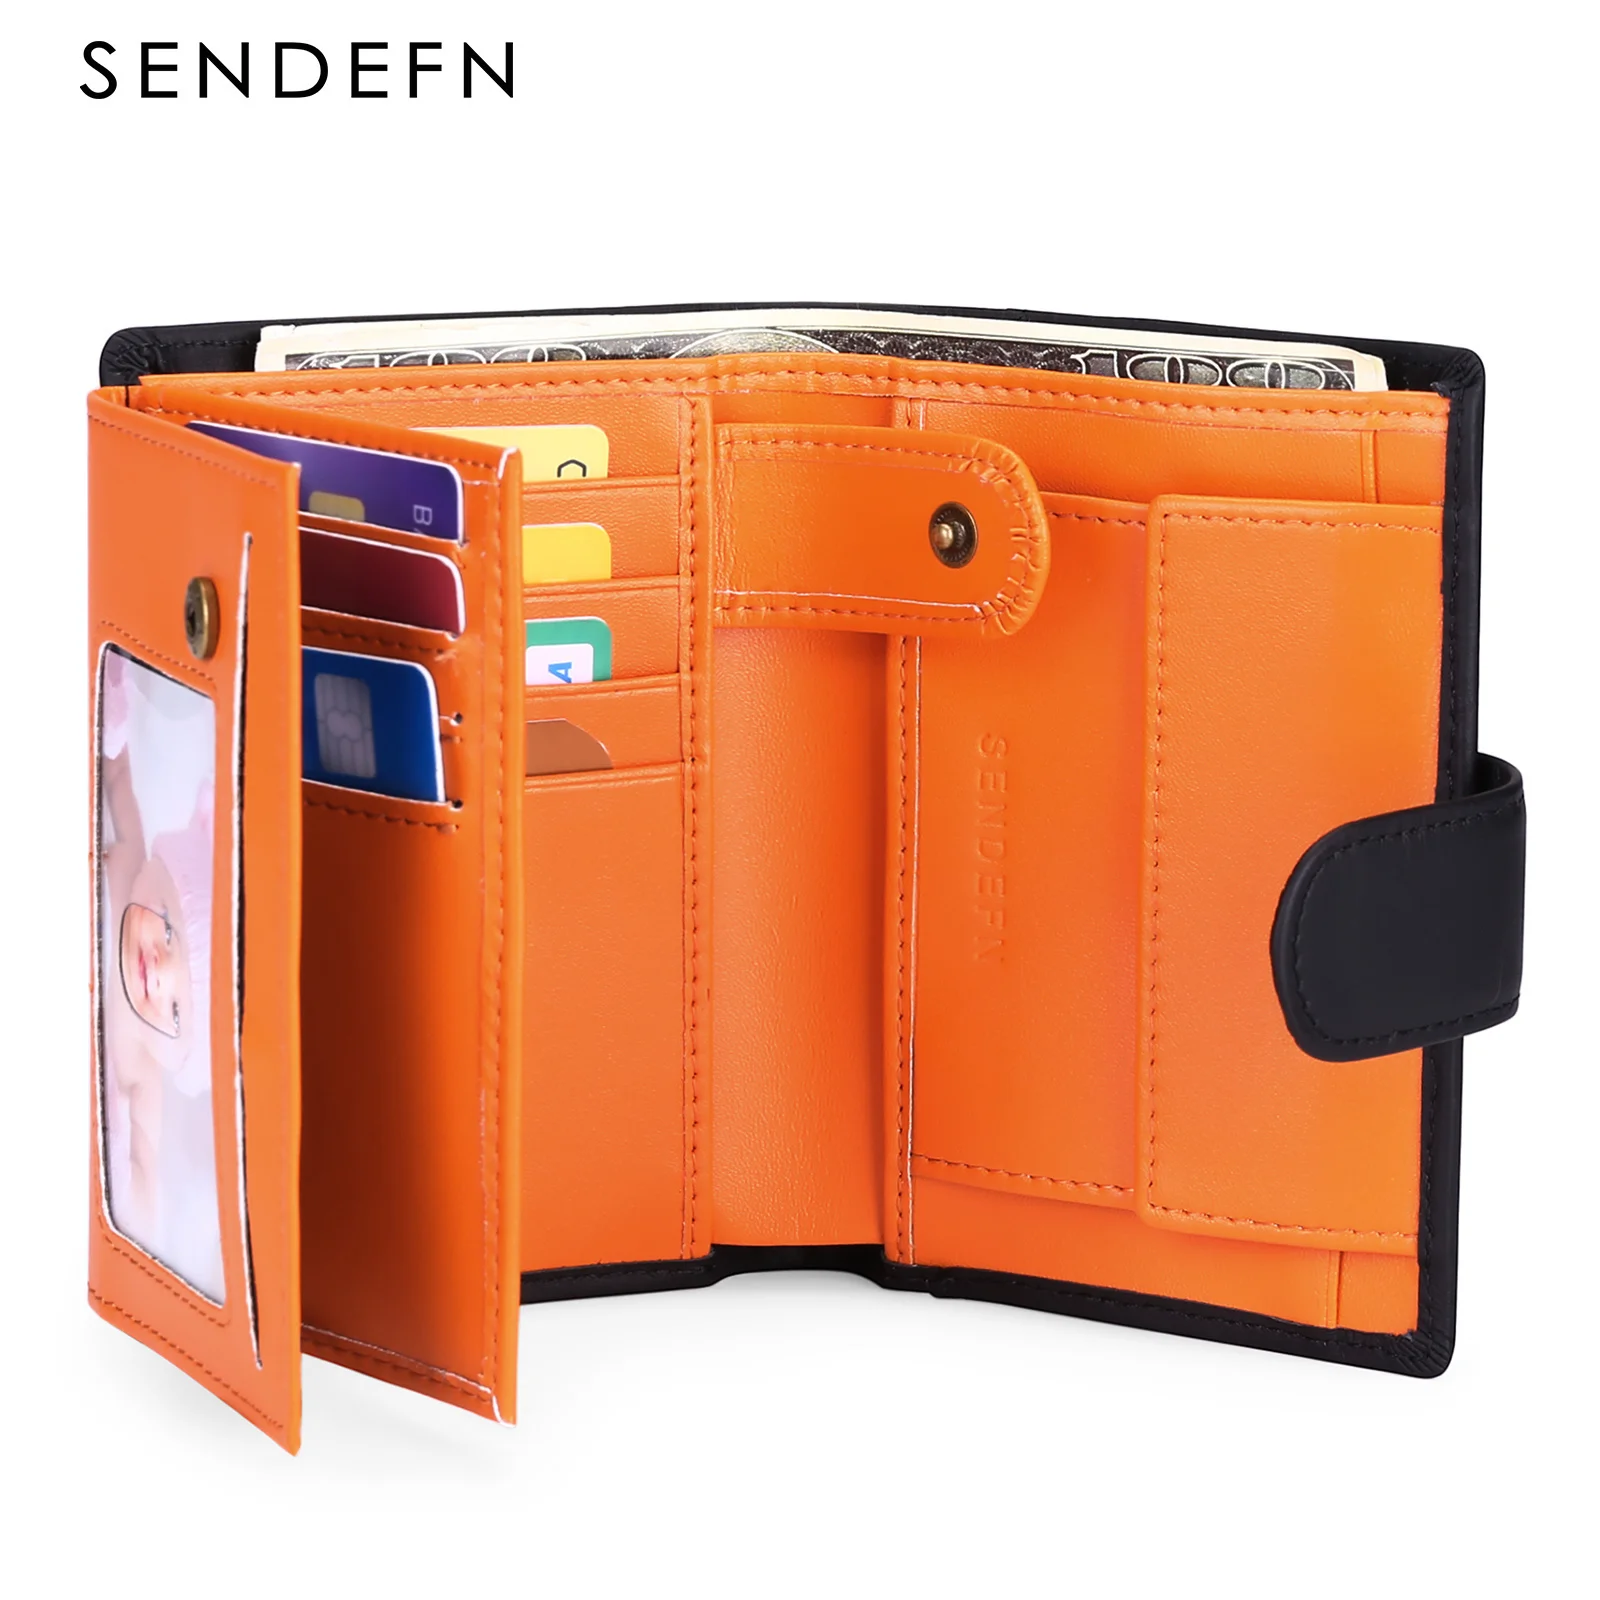 

SENDEFN Wallet Men's Short Anti-Theft Brush Leather Wallet European And American Style Color Matching Zero Wallet 5241